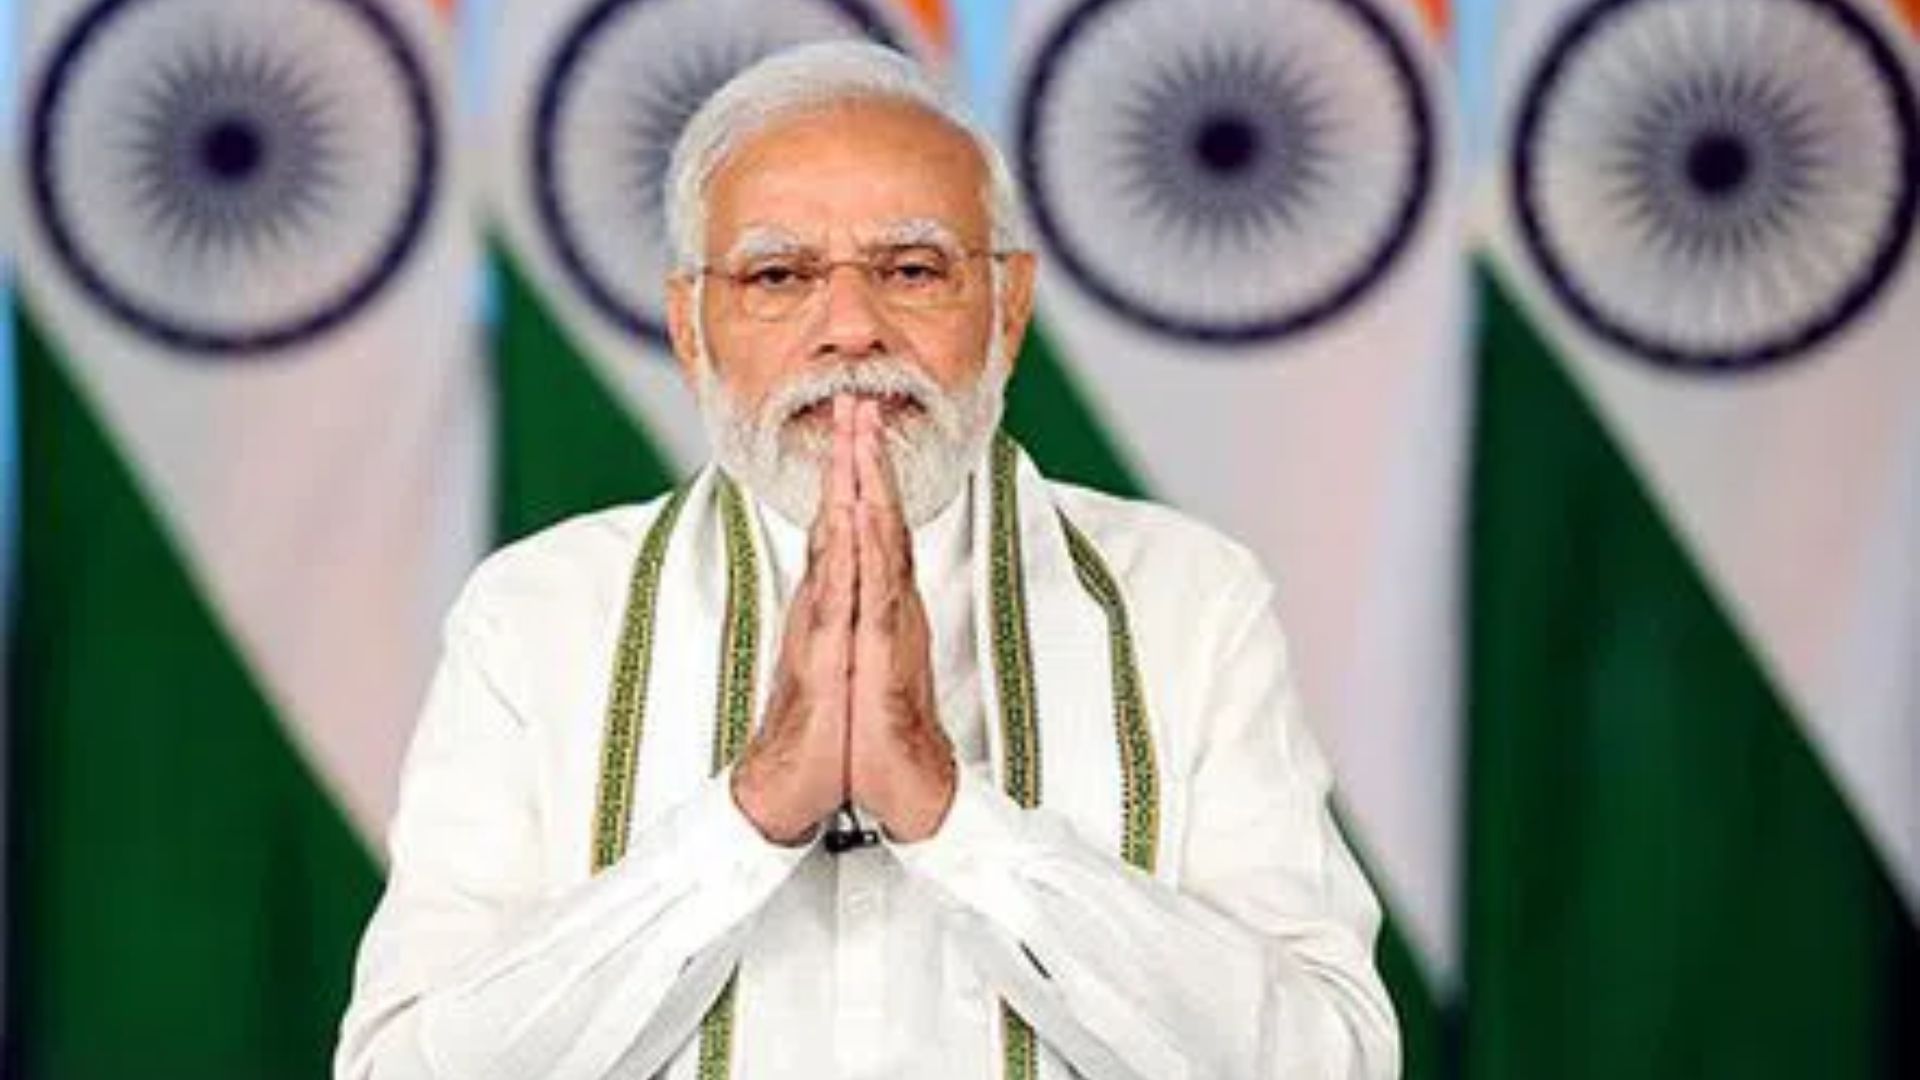 PM Modi conveys his best wishes to nation on occasion of 75th Republic Day